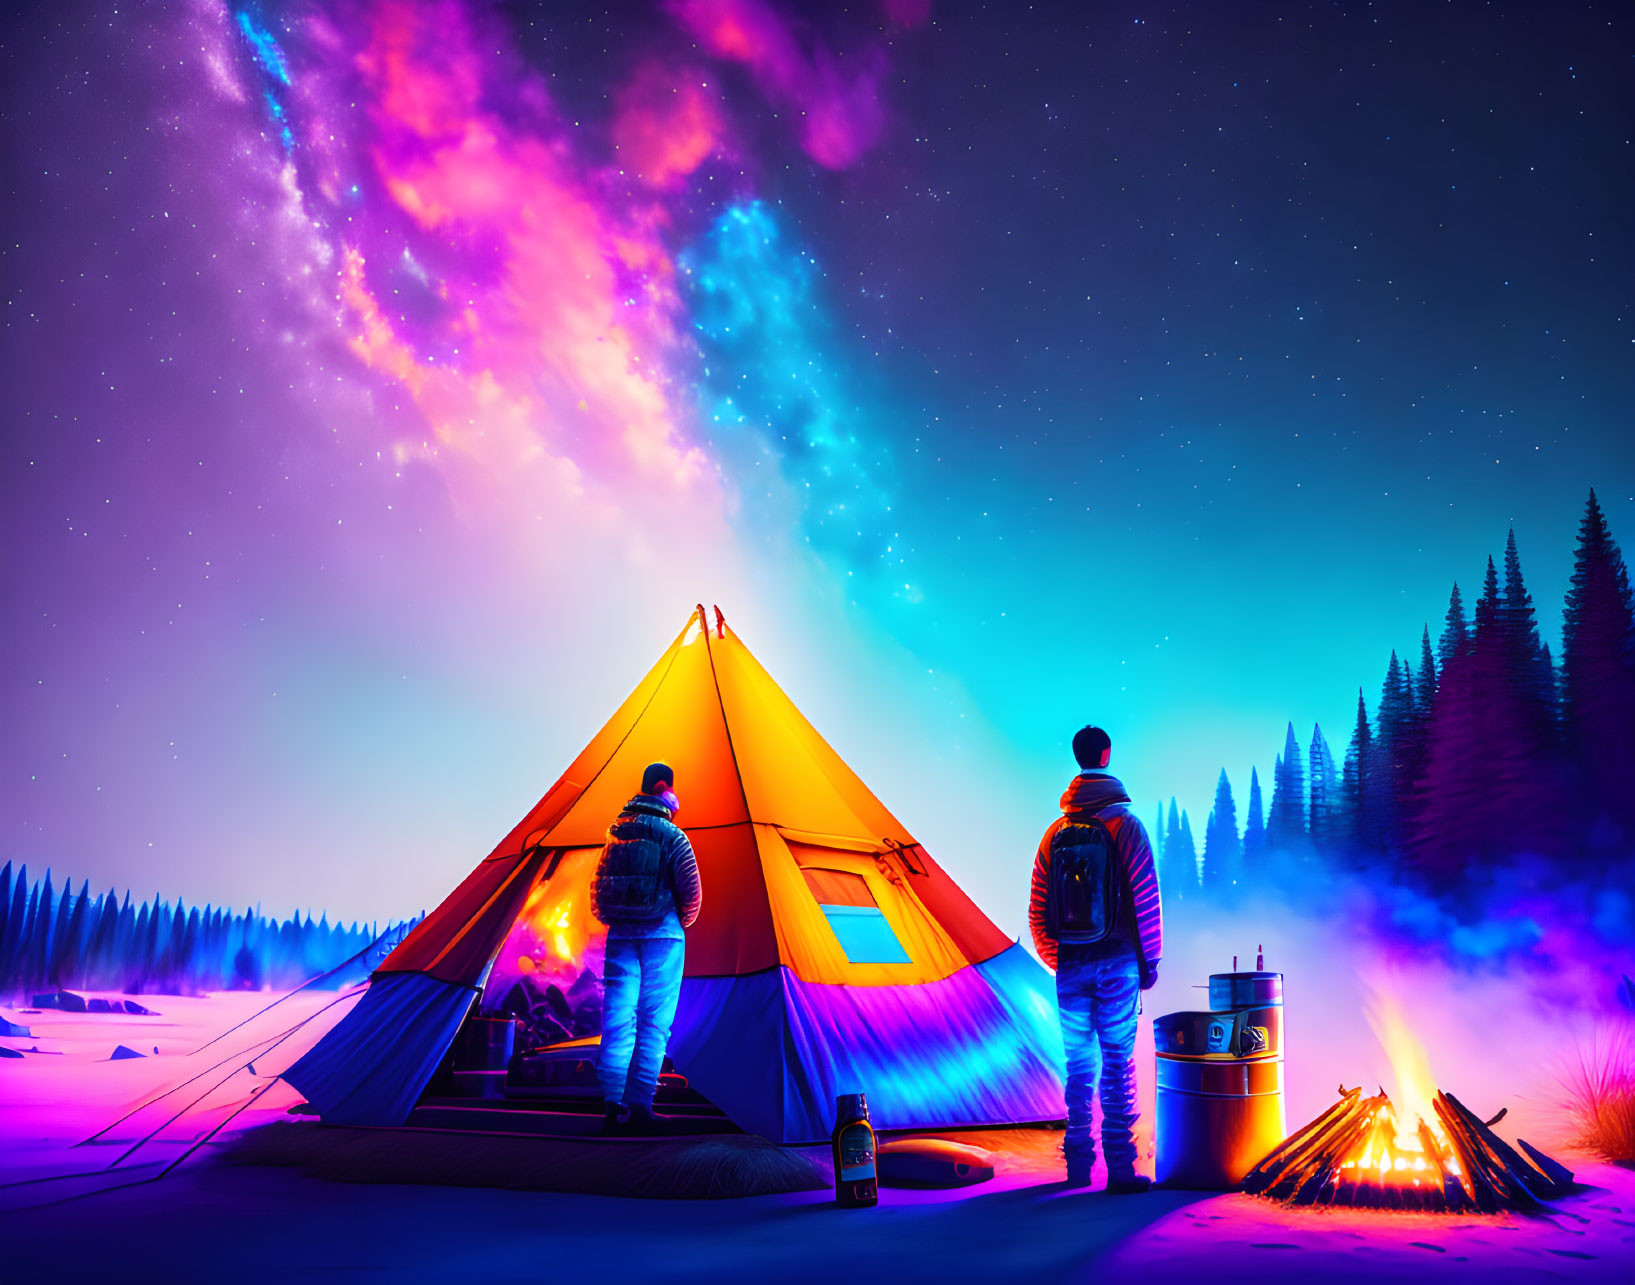 Person standing next to tent under vibrant starry sky with campfire and colorful aurora.